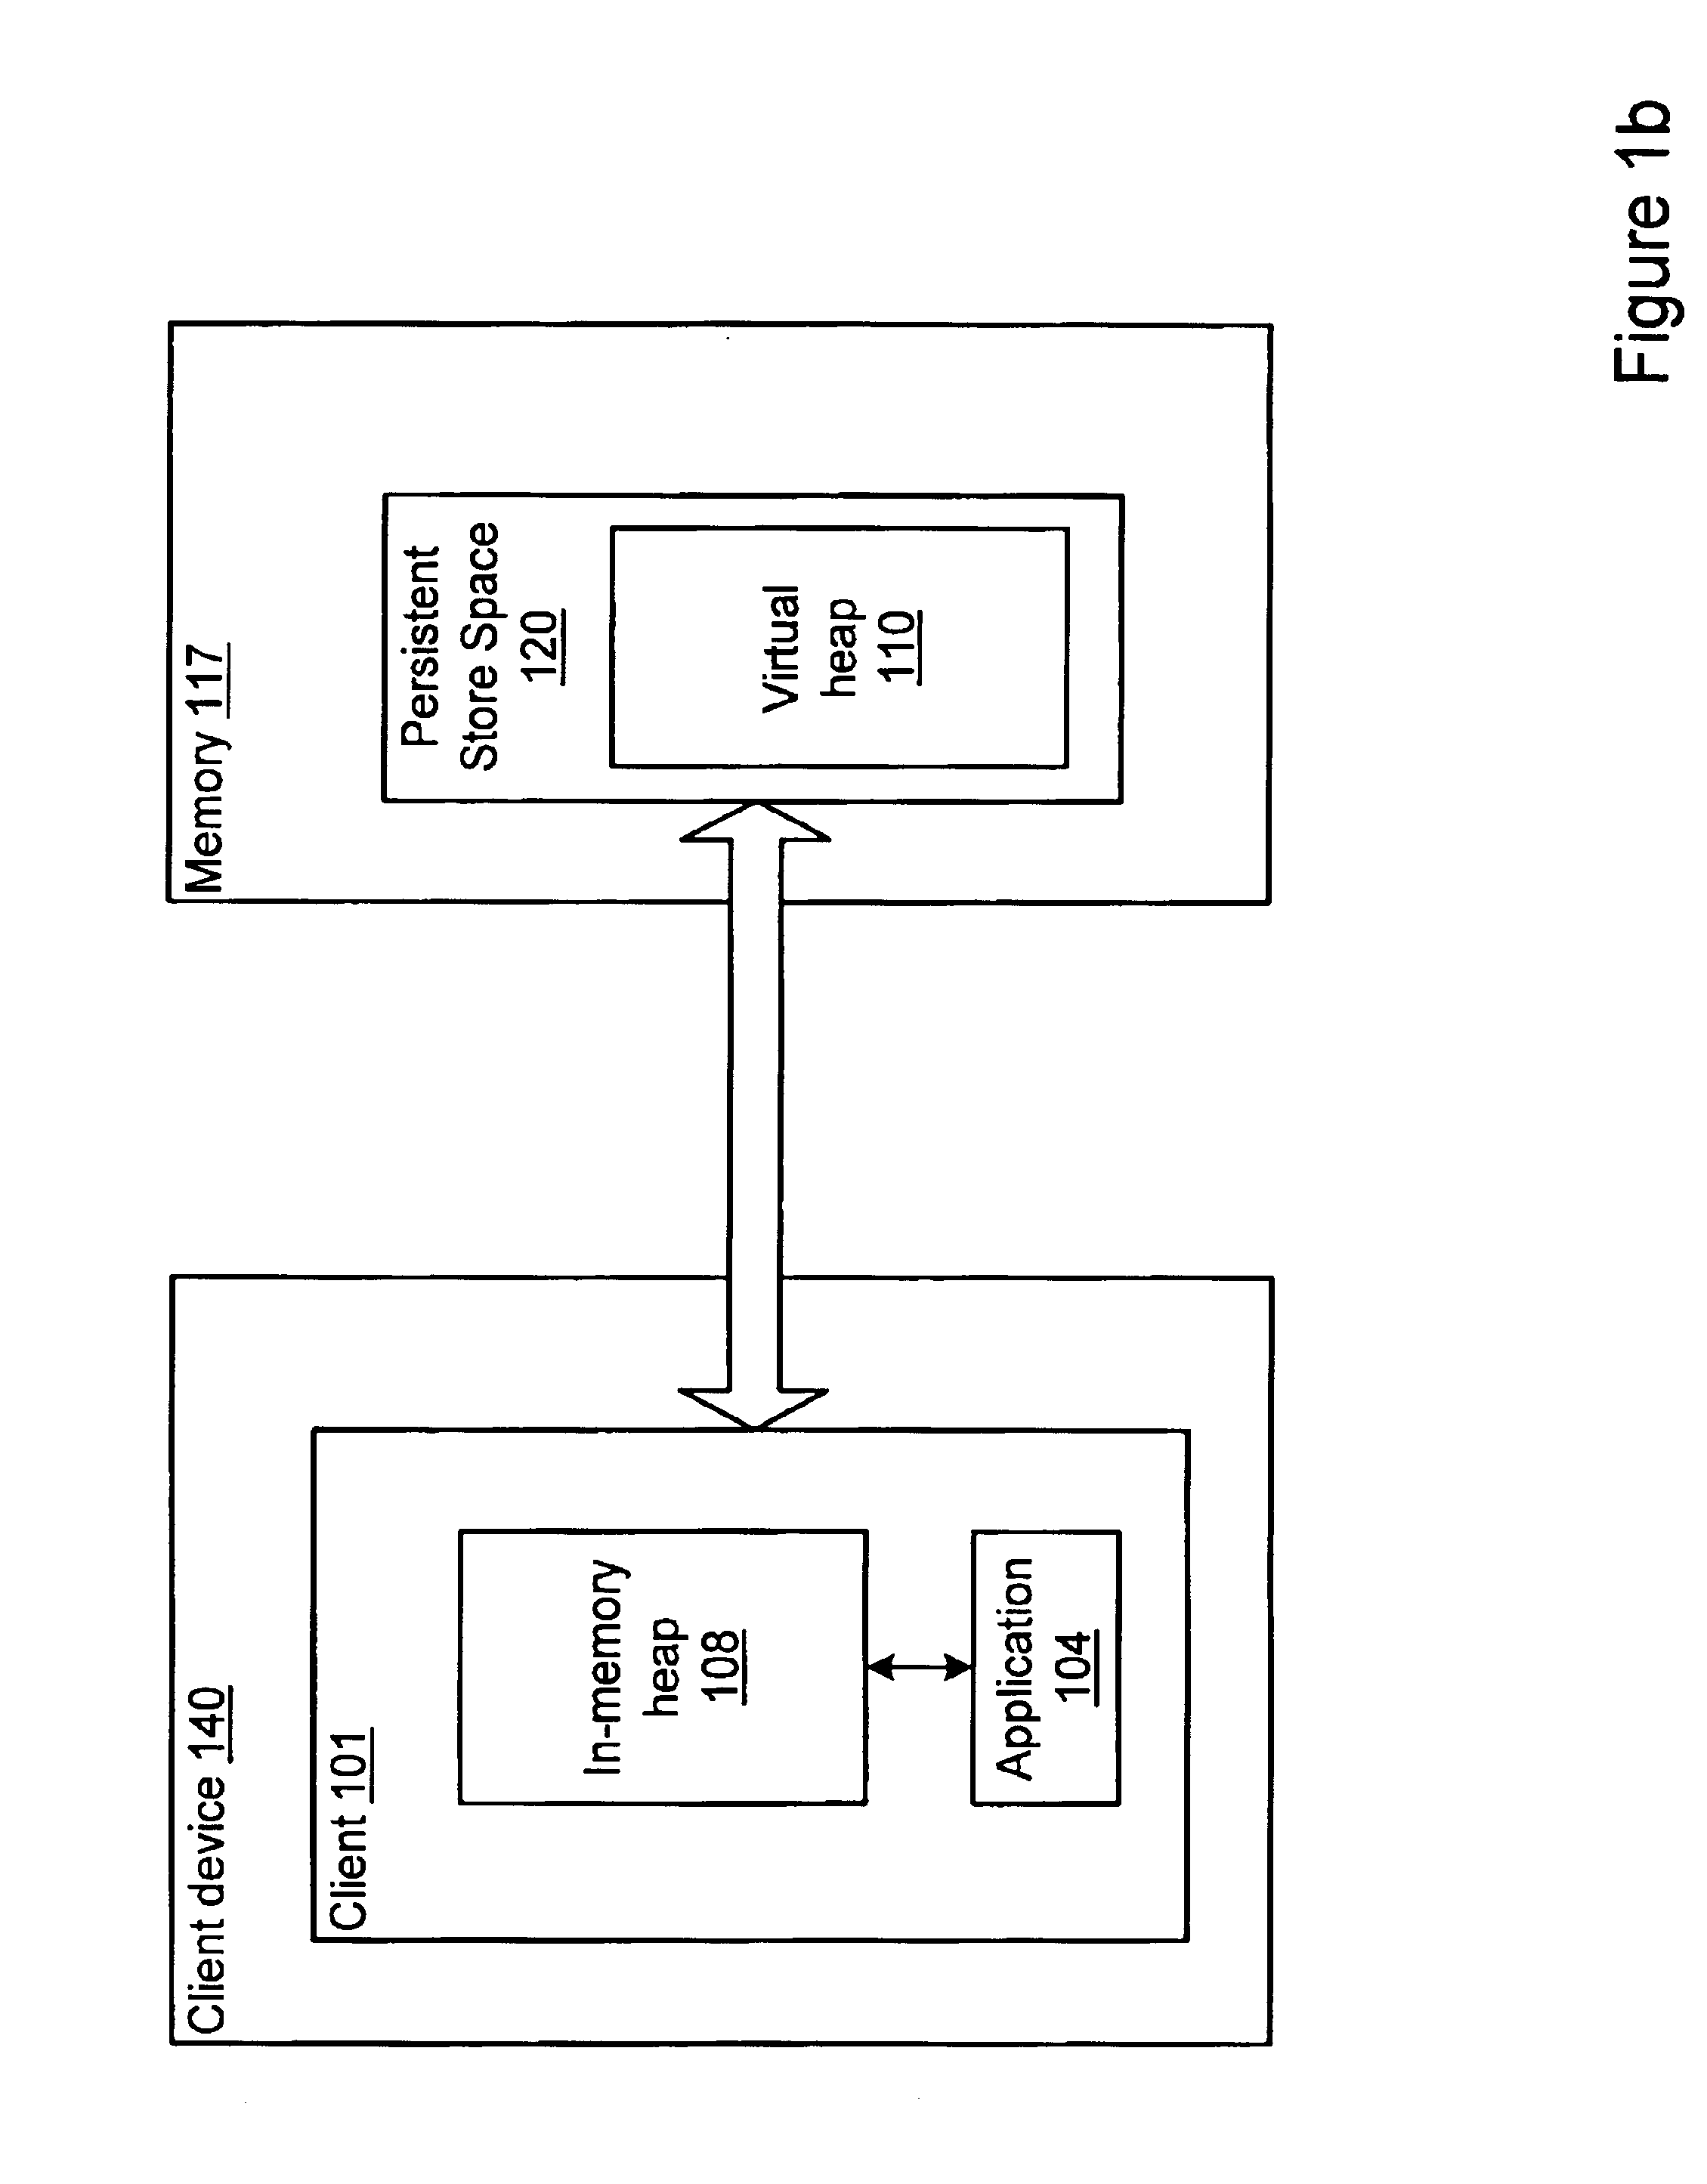 System and method for migrating processes on a network